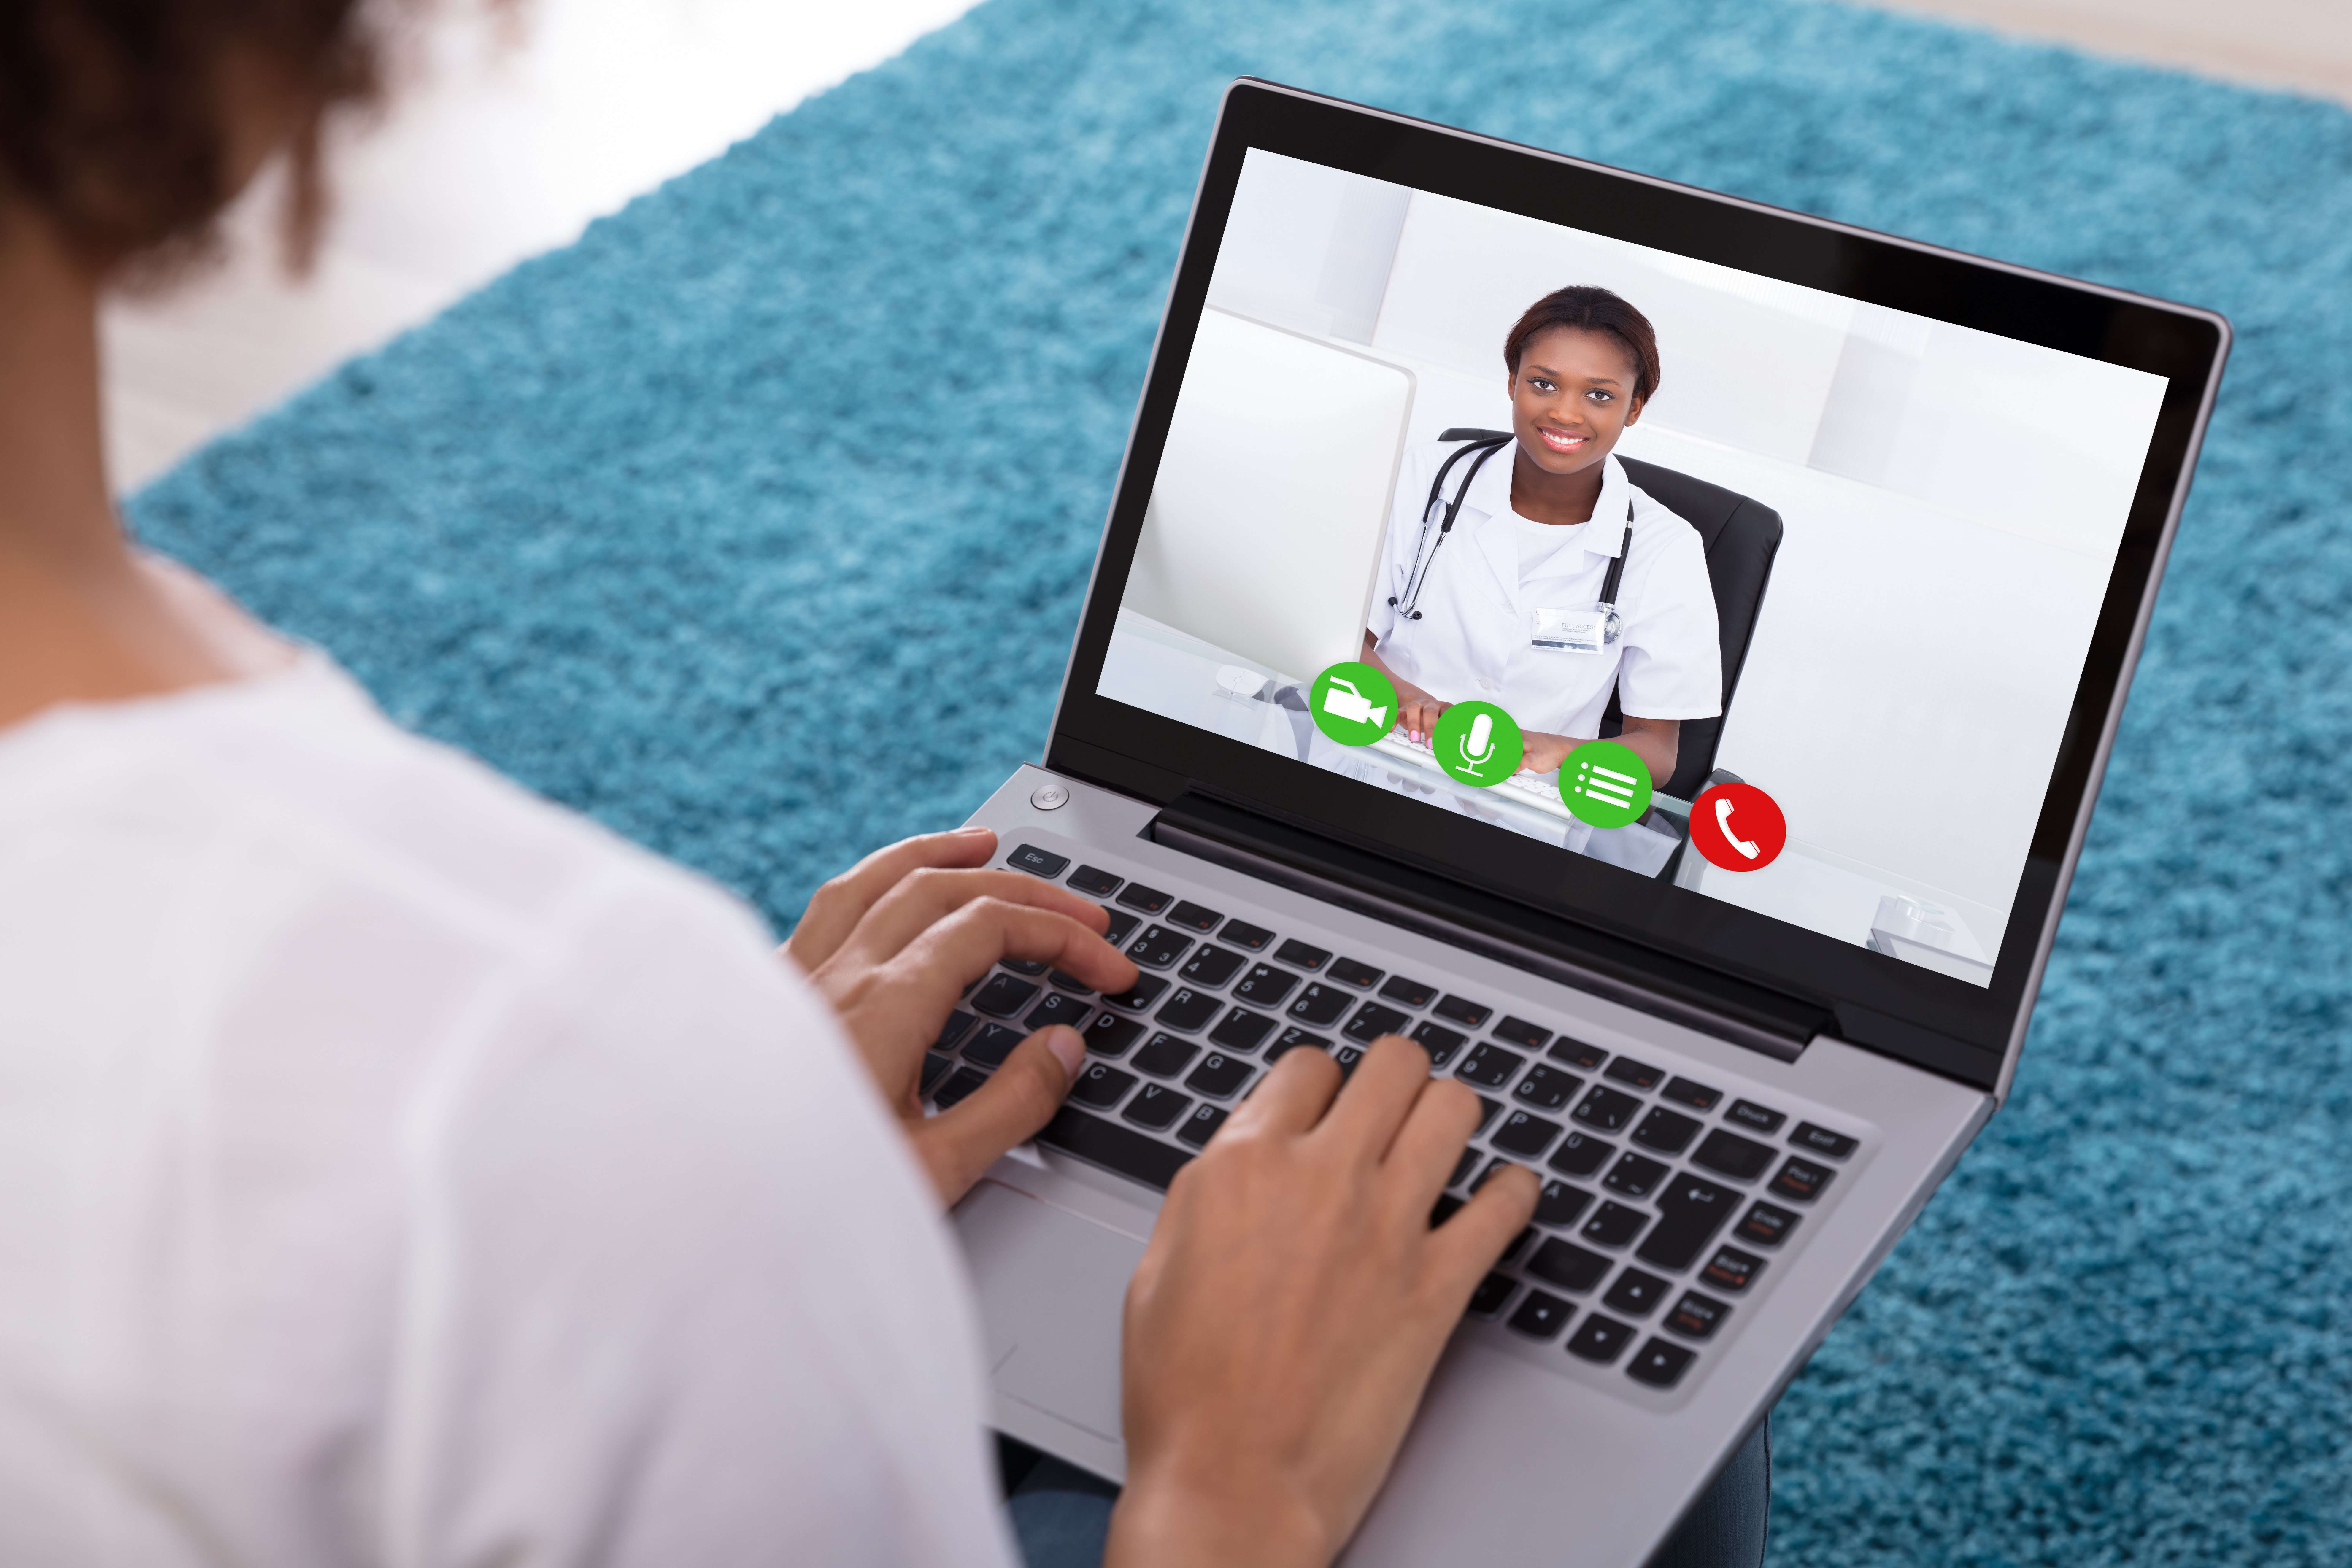 Poor broadband access in rural areas limits telemedicine use: study